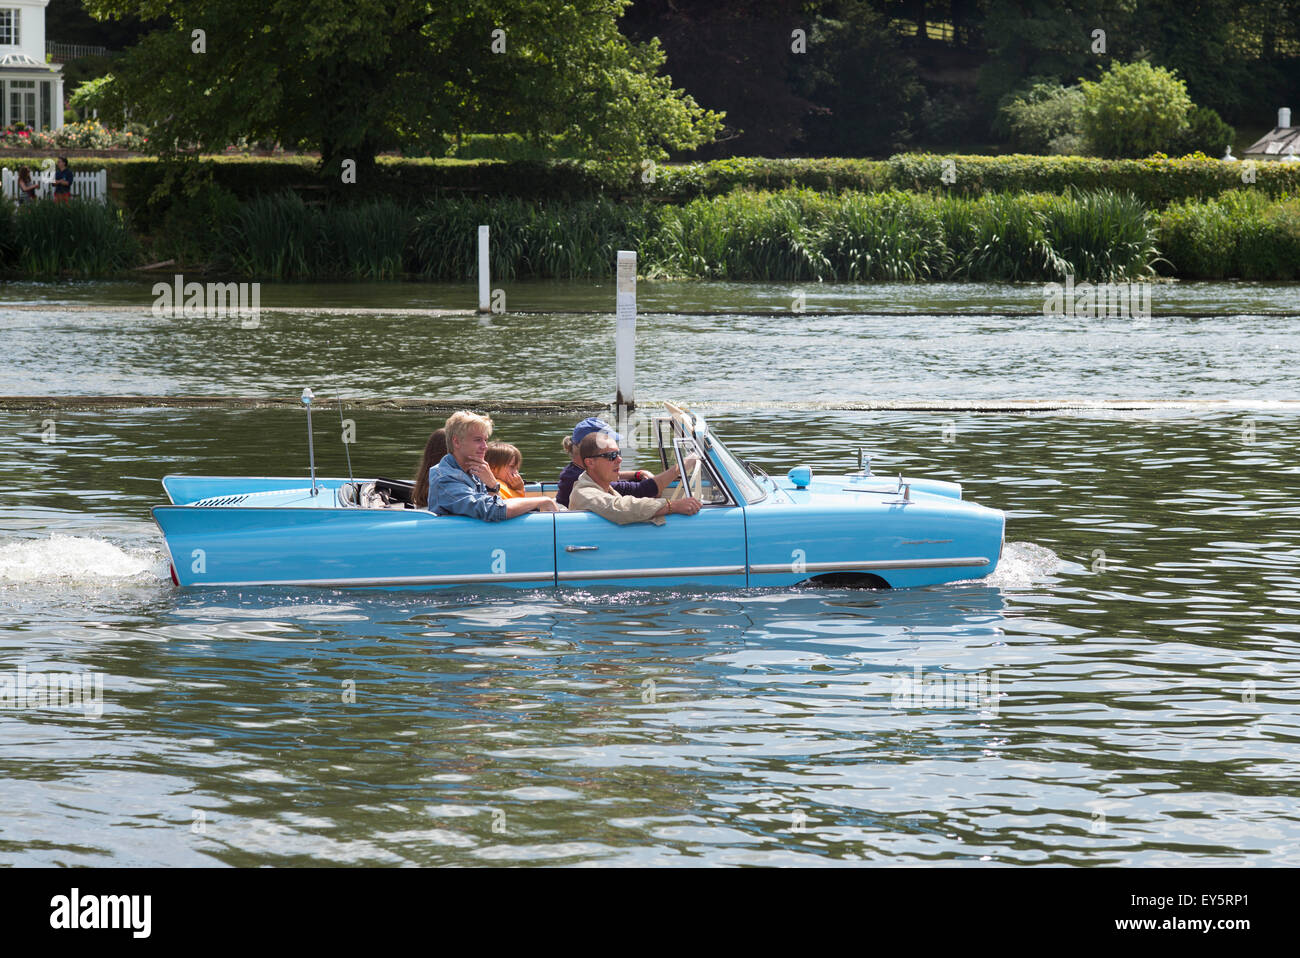 Amphicar in the river at the Thames Traditional Boat Festival, Fawley Meadows, Henley On Thames, Oxfordshire, England Stock Photo